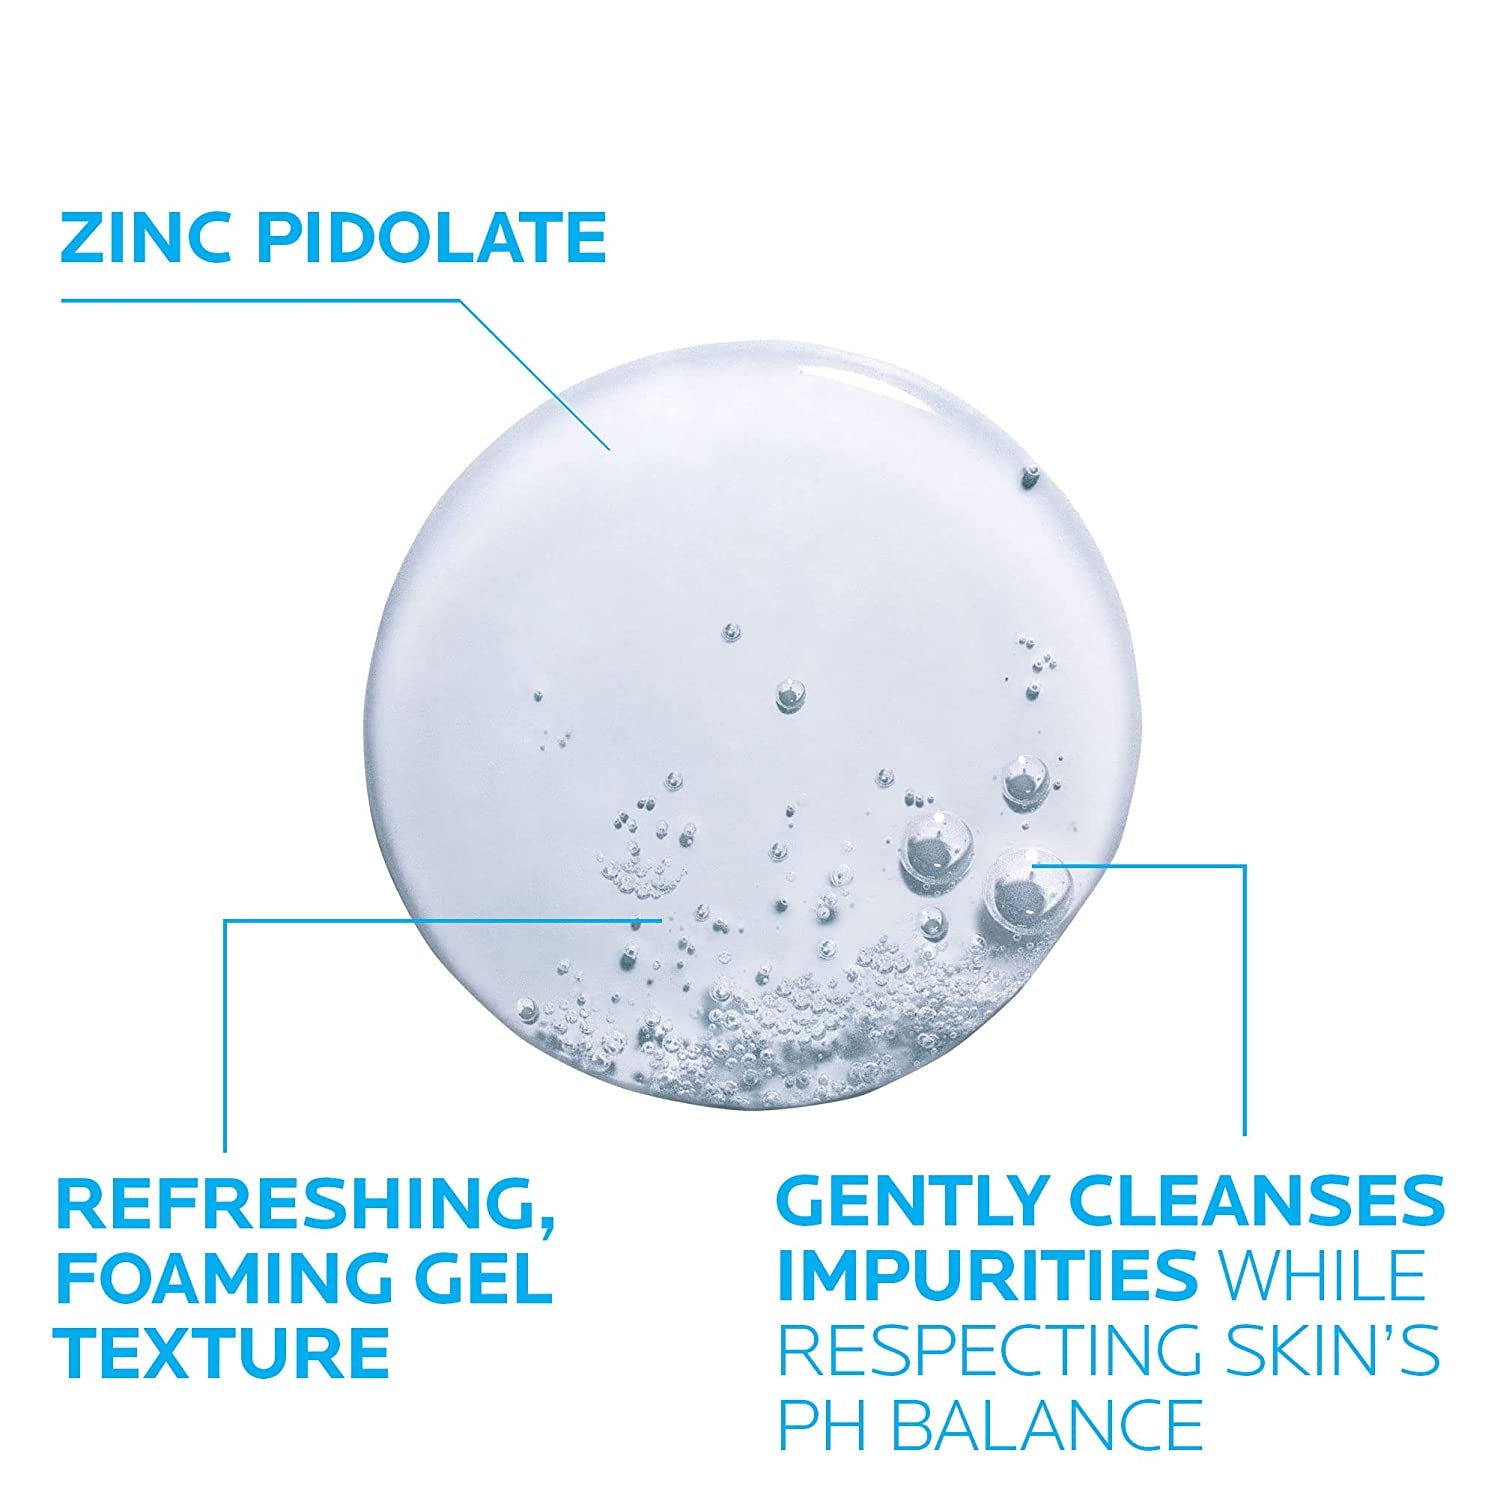 La Roche-Posay Effaclar Purifying Foaming Gel Cleanser for Oily Skin, Alcohol Free Acne Face Wash, Oil Absorbing Deep Pore Cleanser, Oil Free, Light Scent and Safe for Sensitive Skin - Free & Fast Delivery